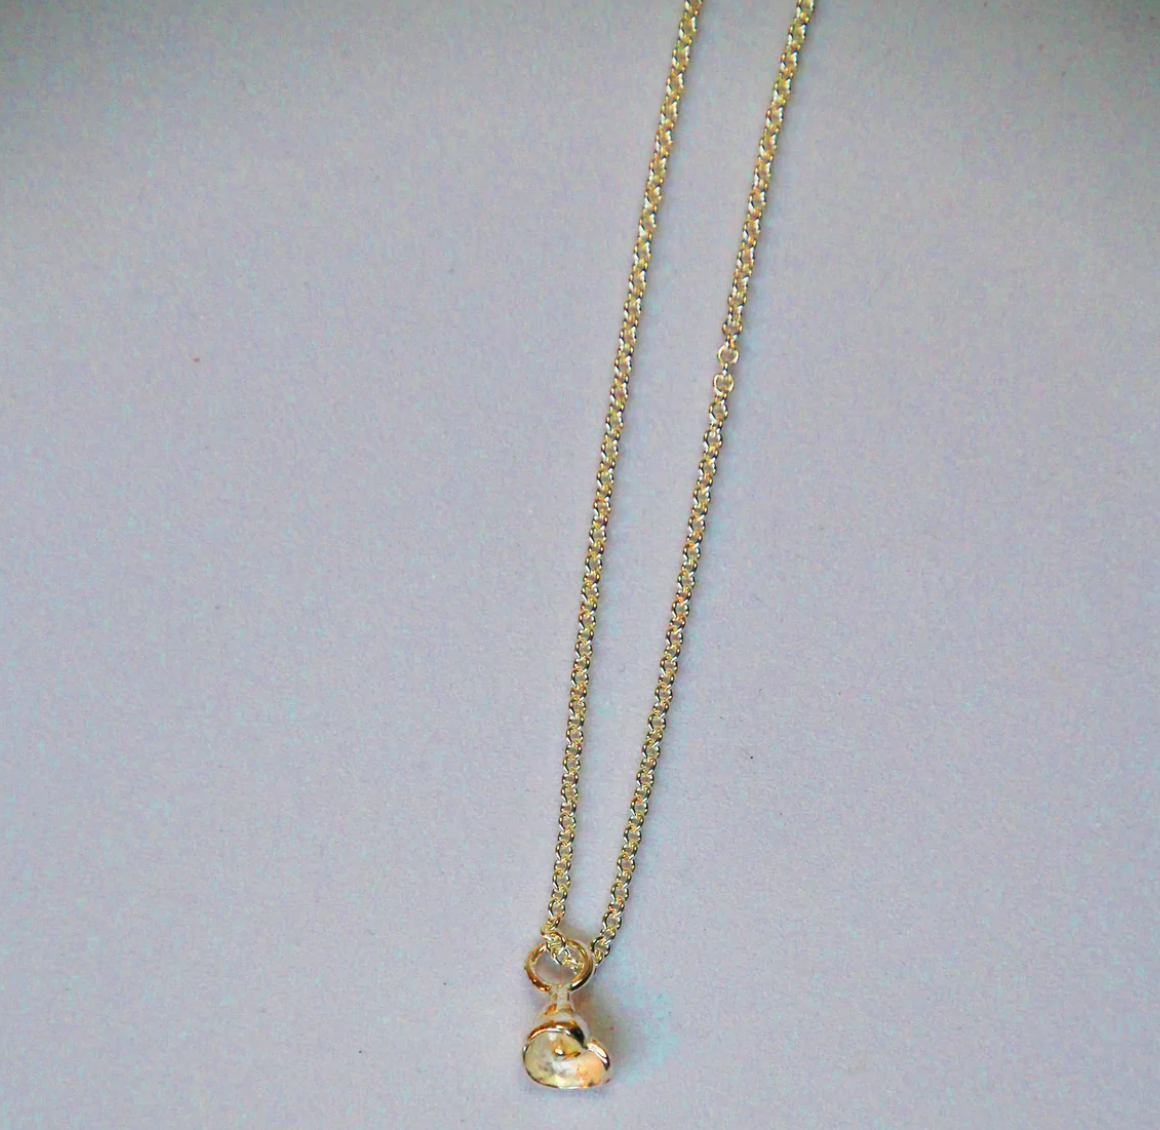 HANNAH BOURN TINY PERIWINKLE NECKLACE